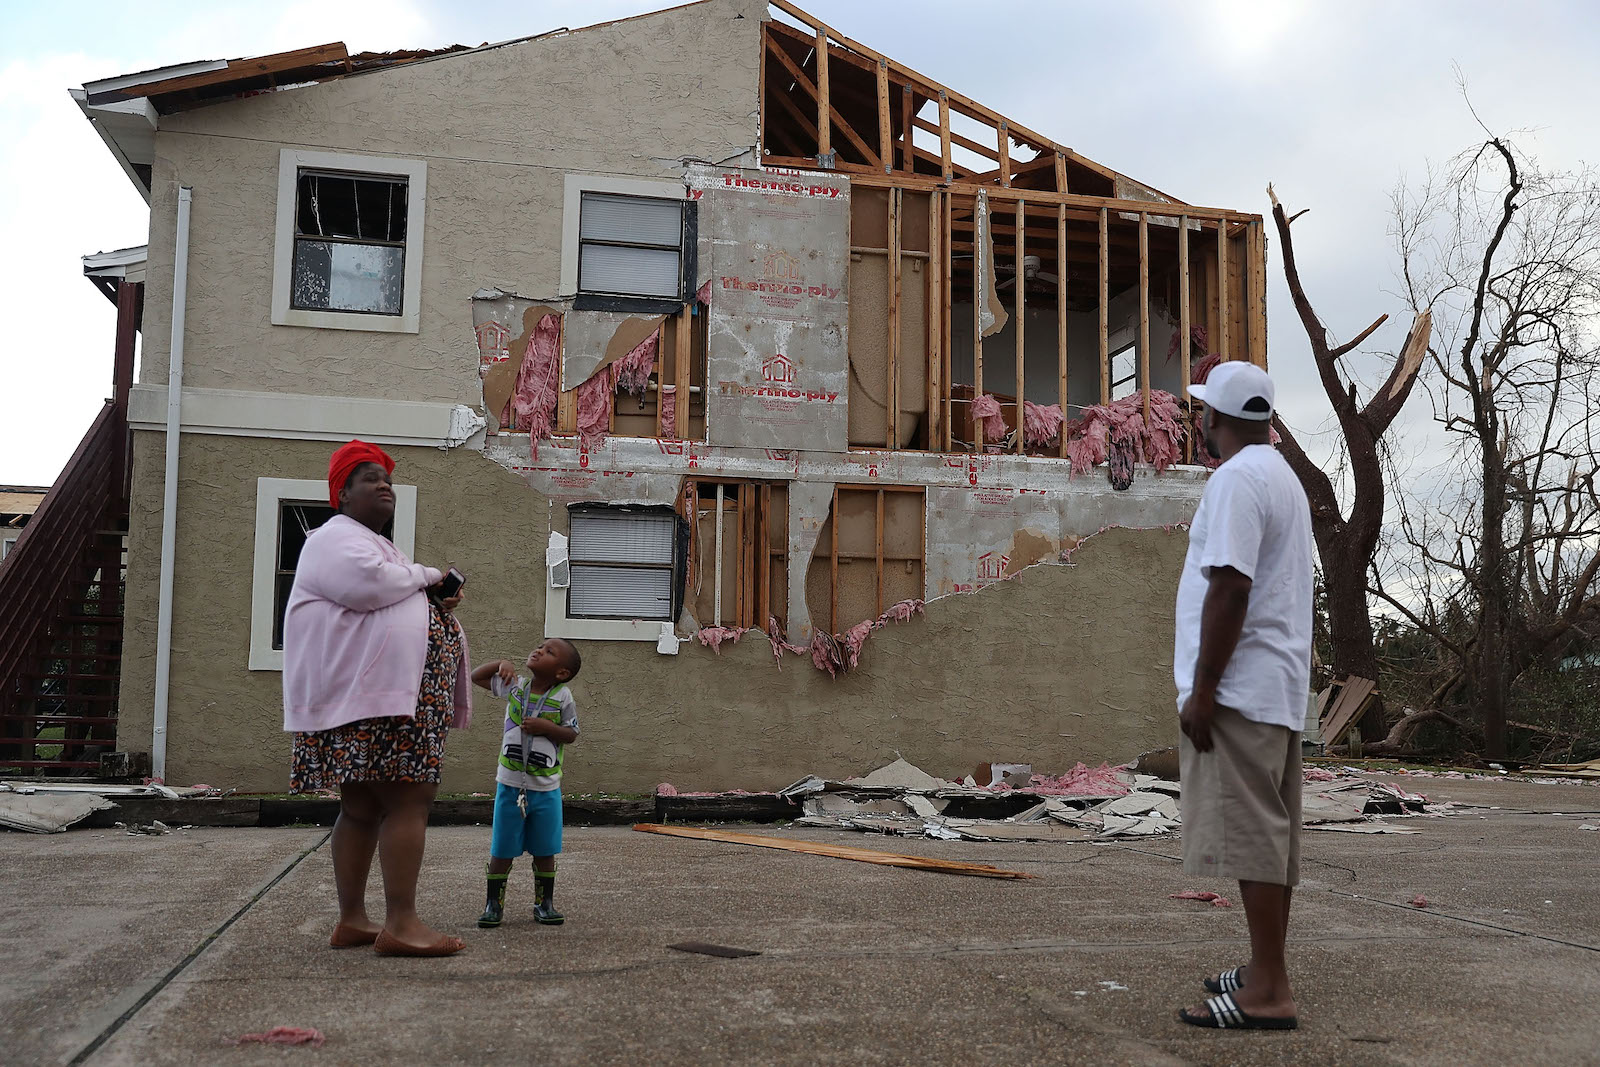 Comeasha Stanley, Ramari Stanley and Terrell Atkinson stand near a heavily damaged apartment after Hurricane Michael passed through the area on October 11, 2018 in Panama City, Florida. The hurricane hit the Florida Panhandle as a category 4 storm.